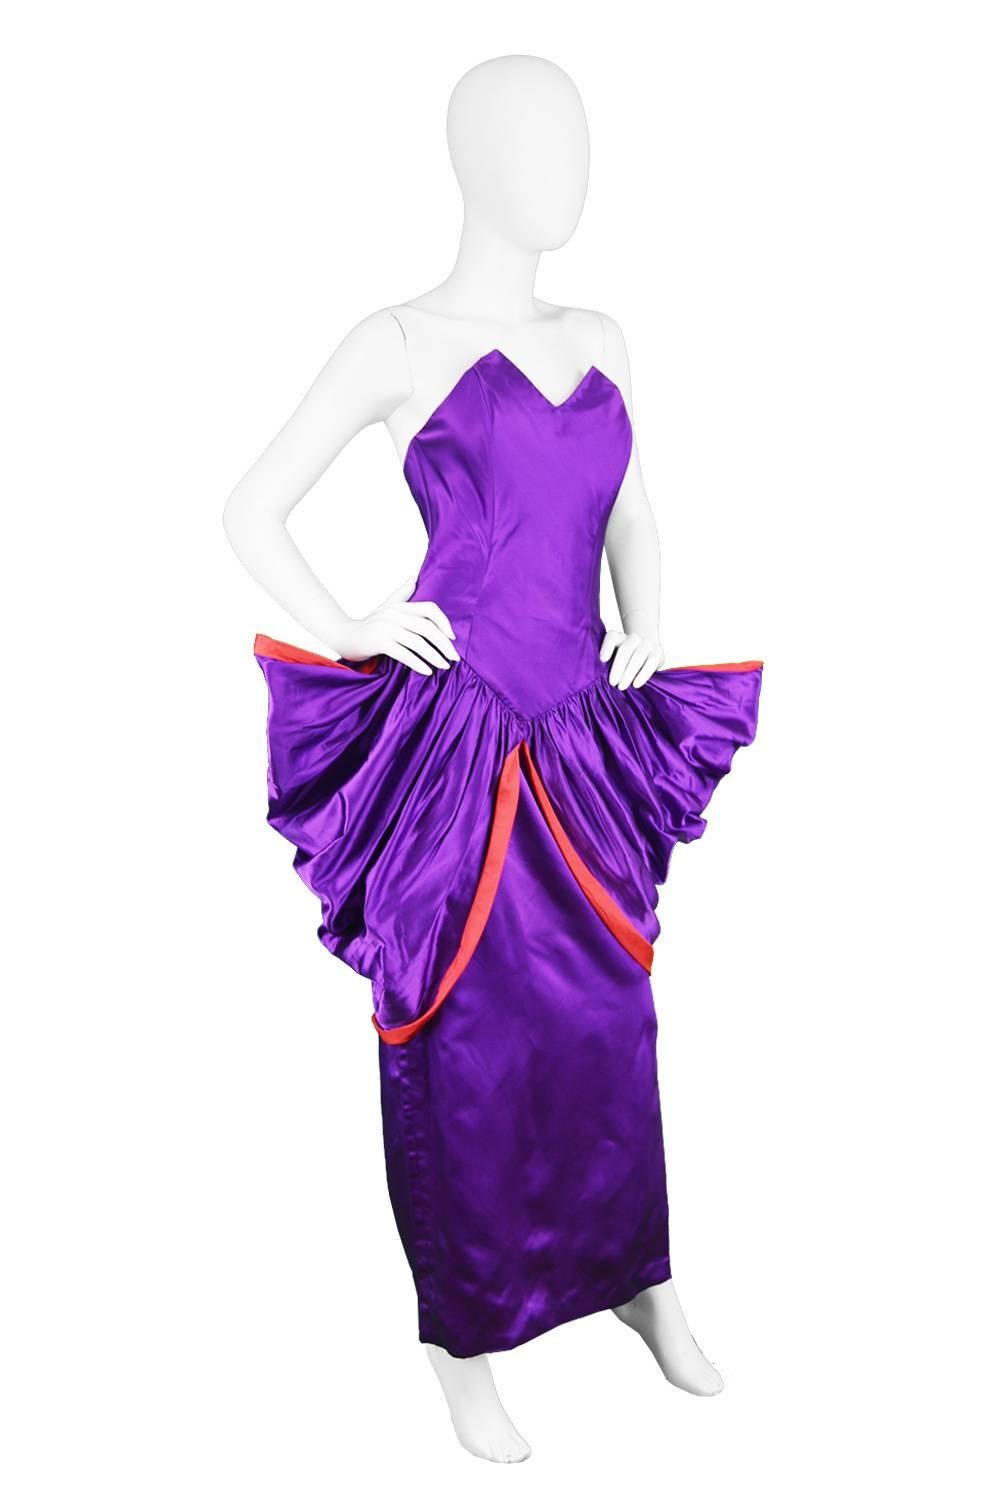 Yuki Architectural Purple & Red Silk Satin Couture Evening Dress, 1980s

Estimated Size: UK 8/ US 4/ EU 36. Please check measurements. 
Bust - Approx 32” / 81cm, hard to measure due to strapless, low back design but fits our 32” bust mannequin
Waist